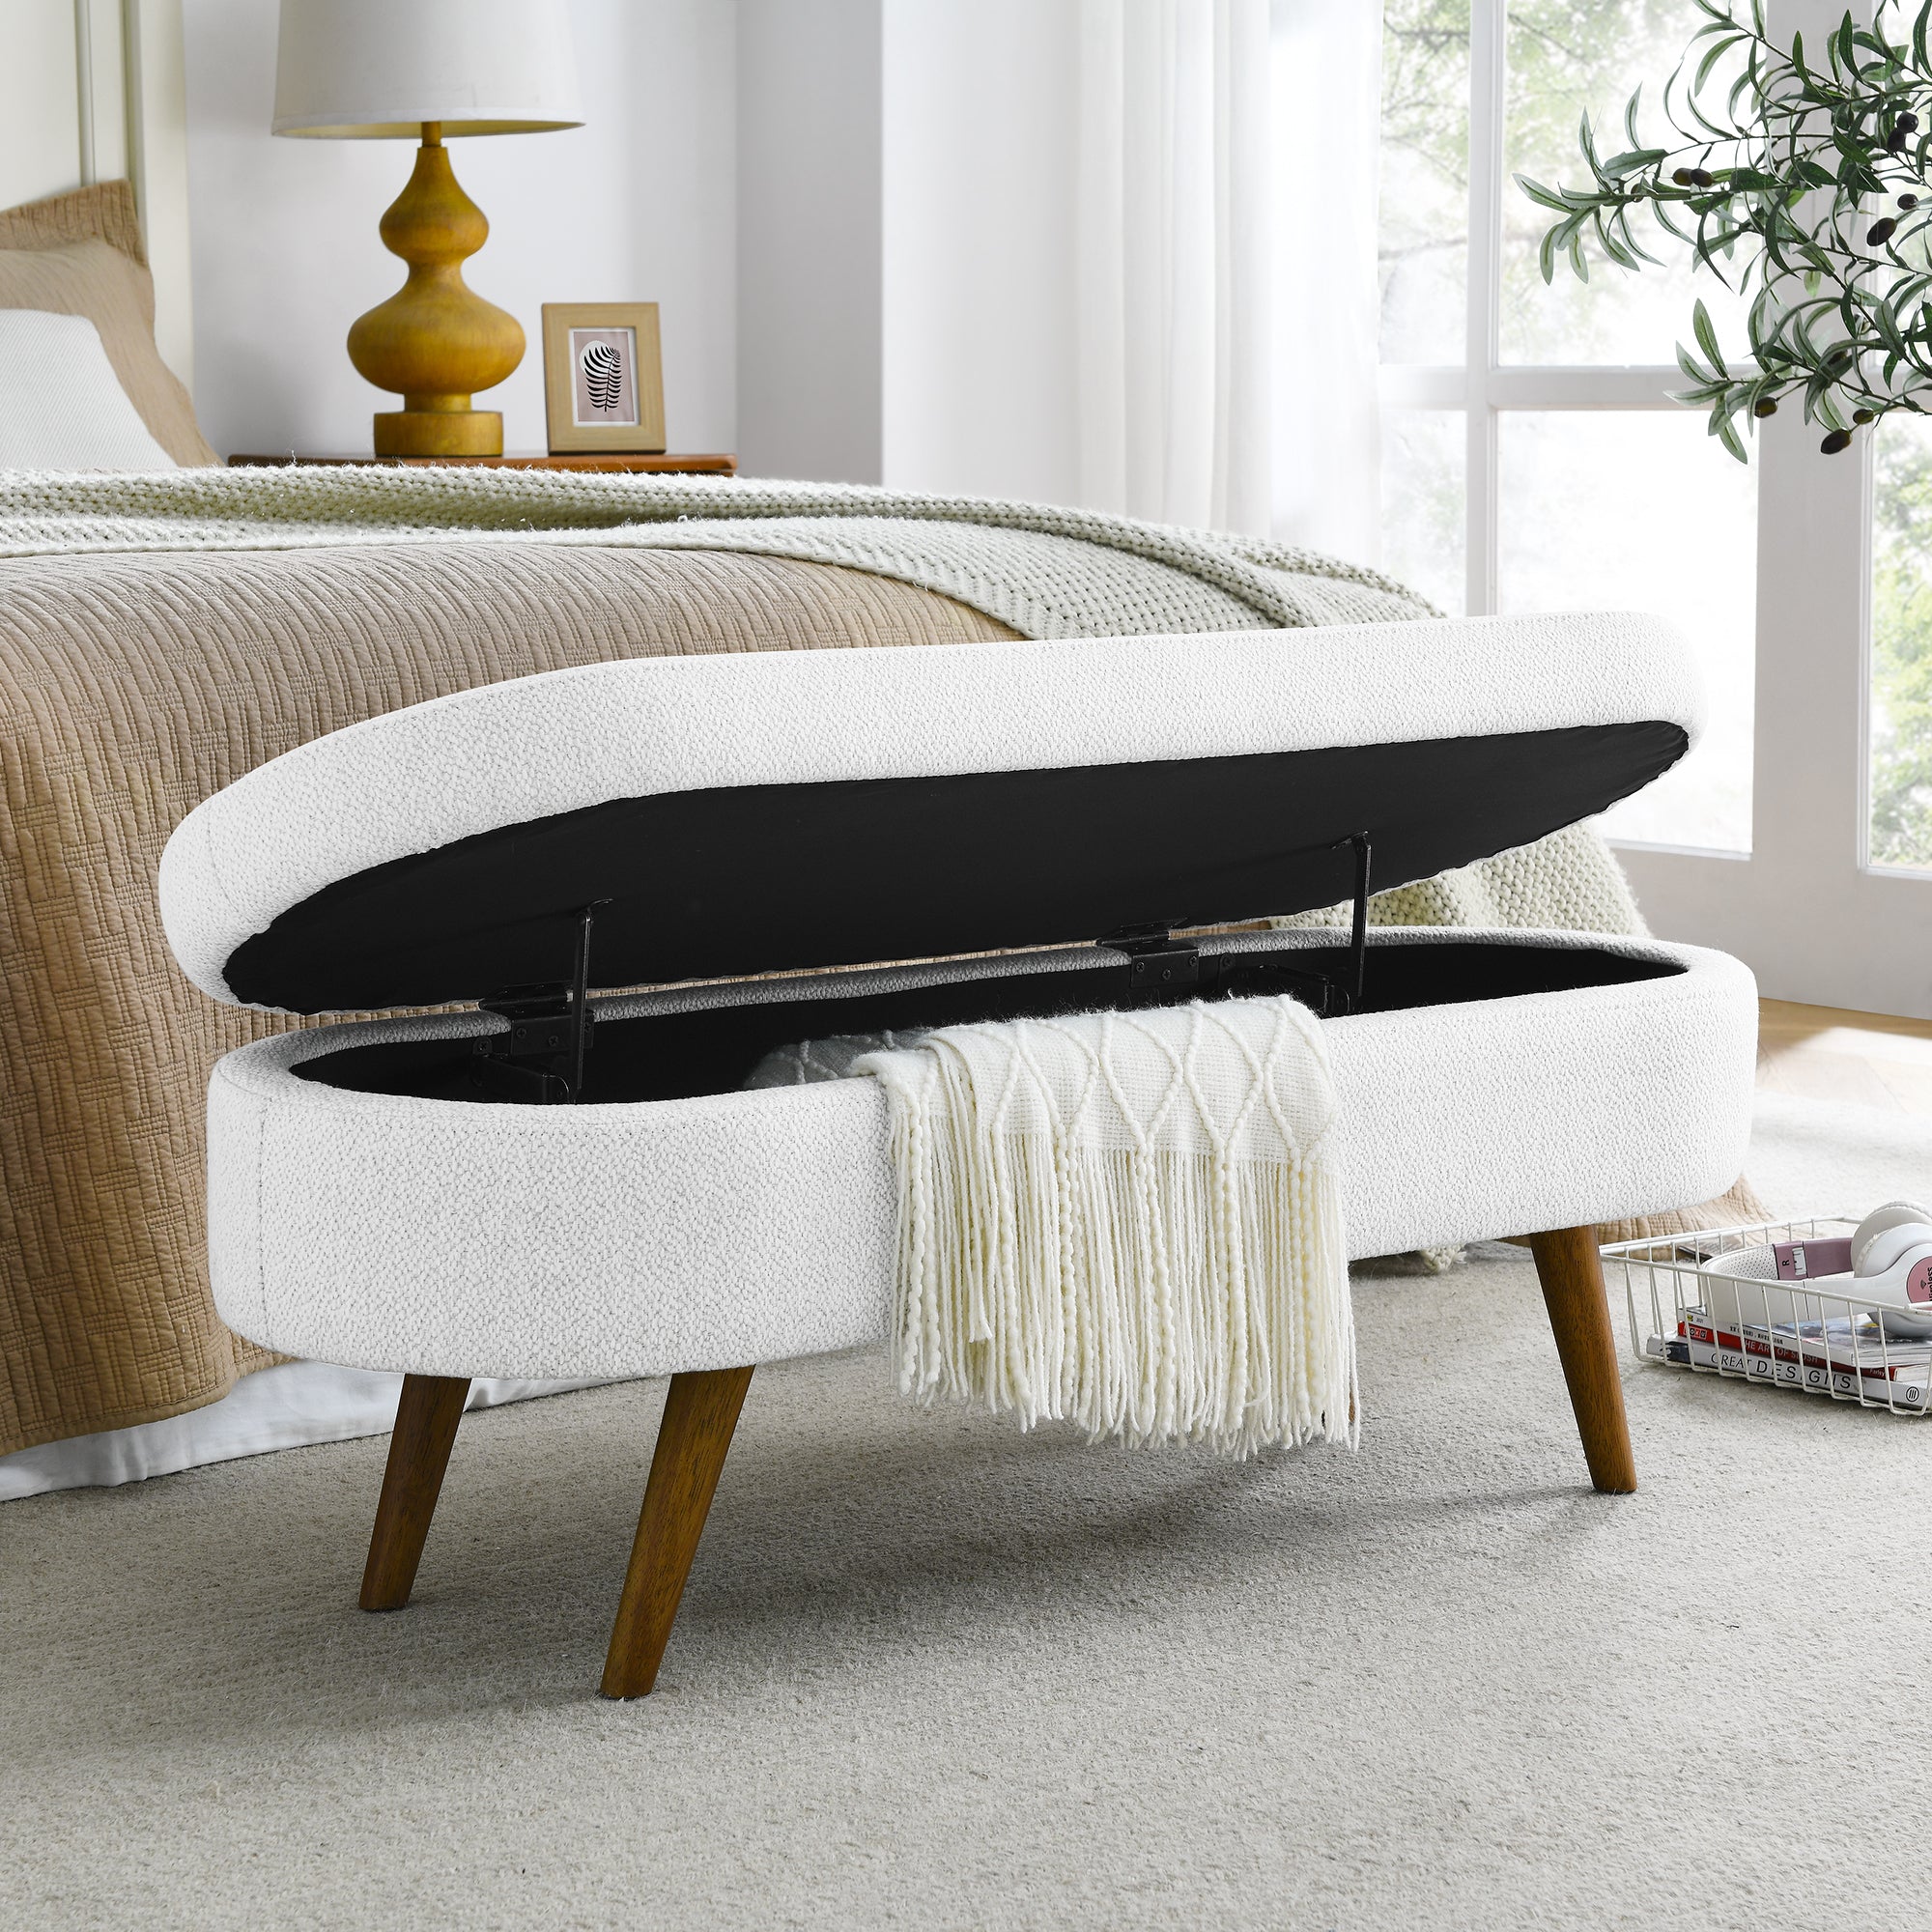 Ottoman Oval Storage Bench, Rubber Wood Legs